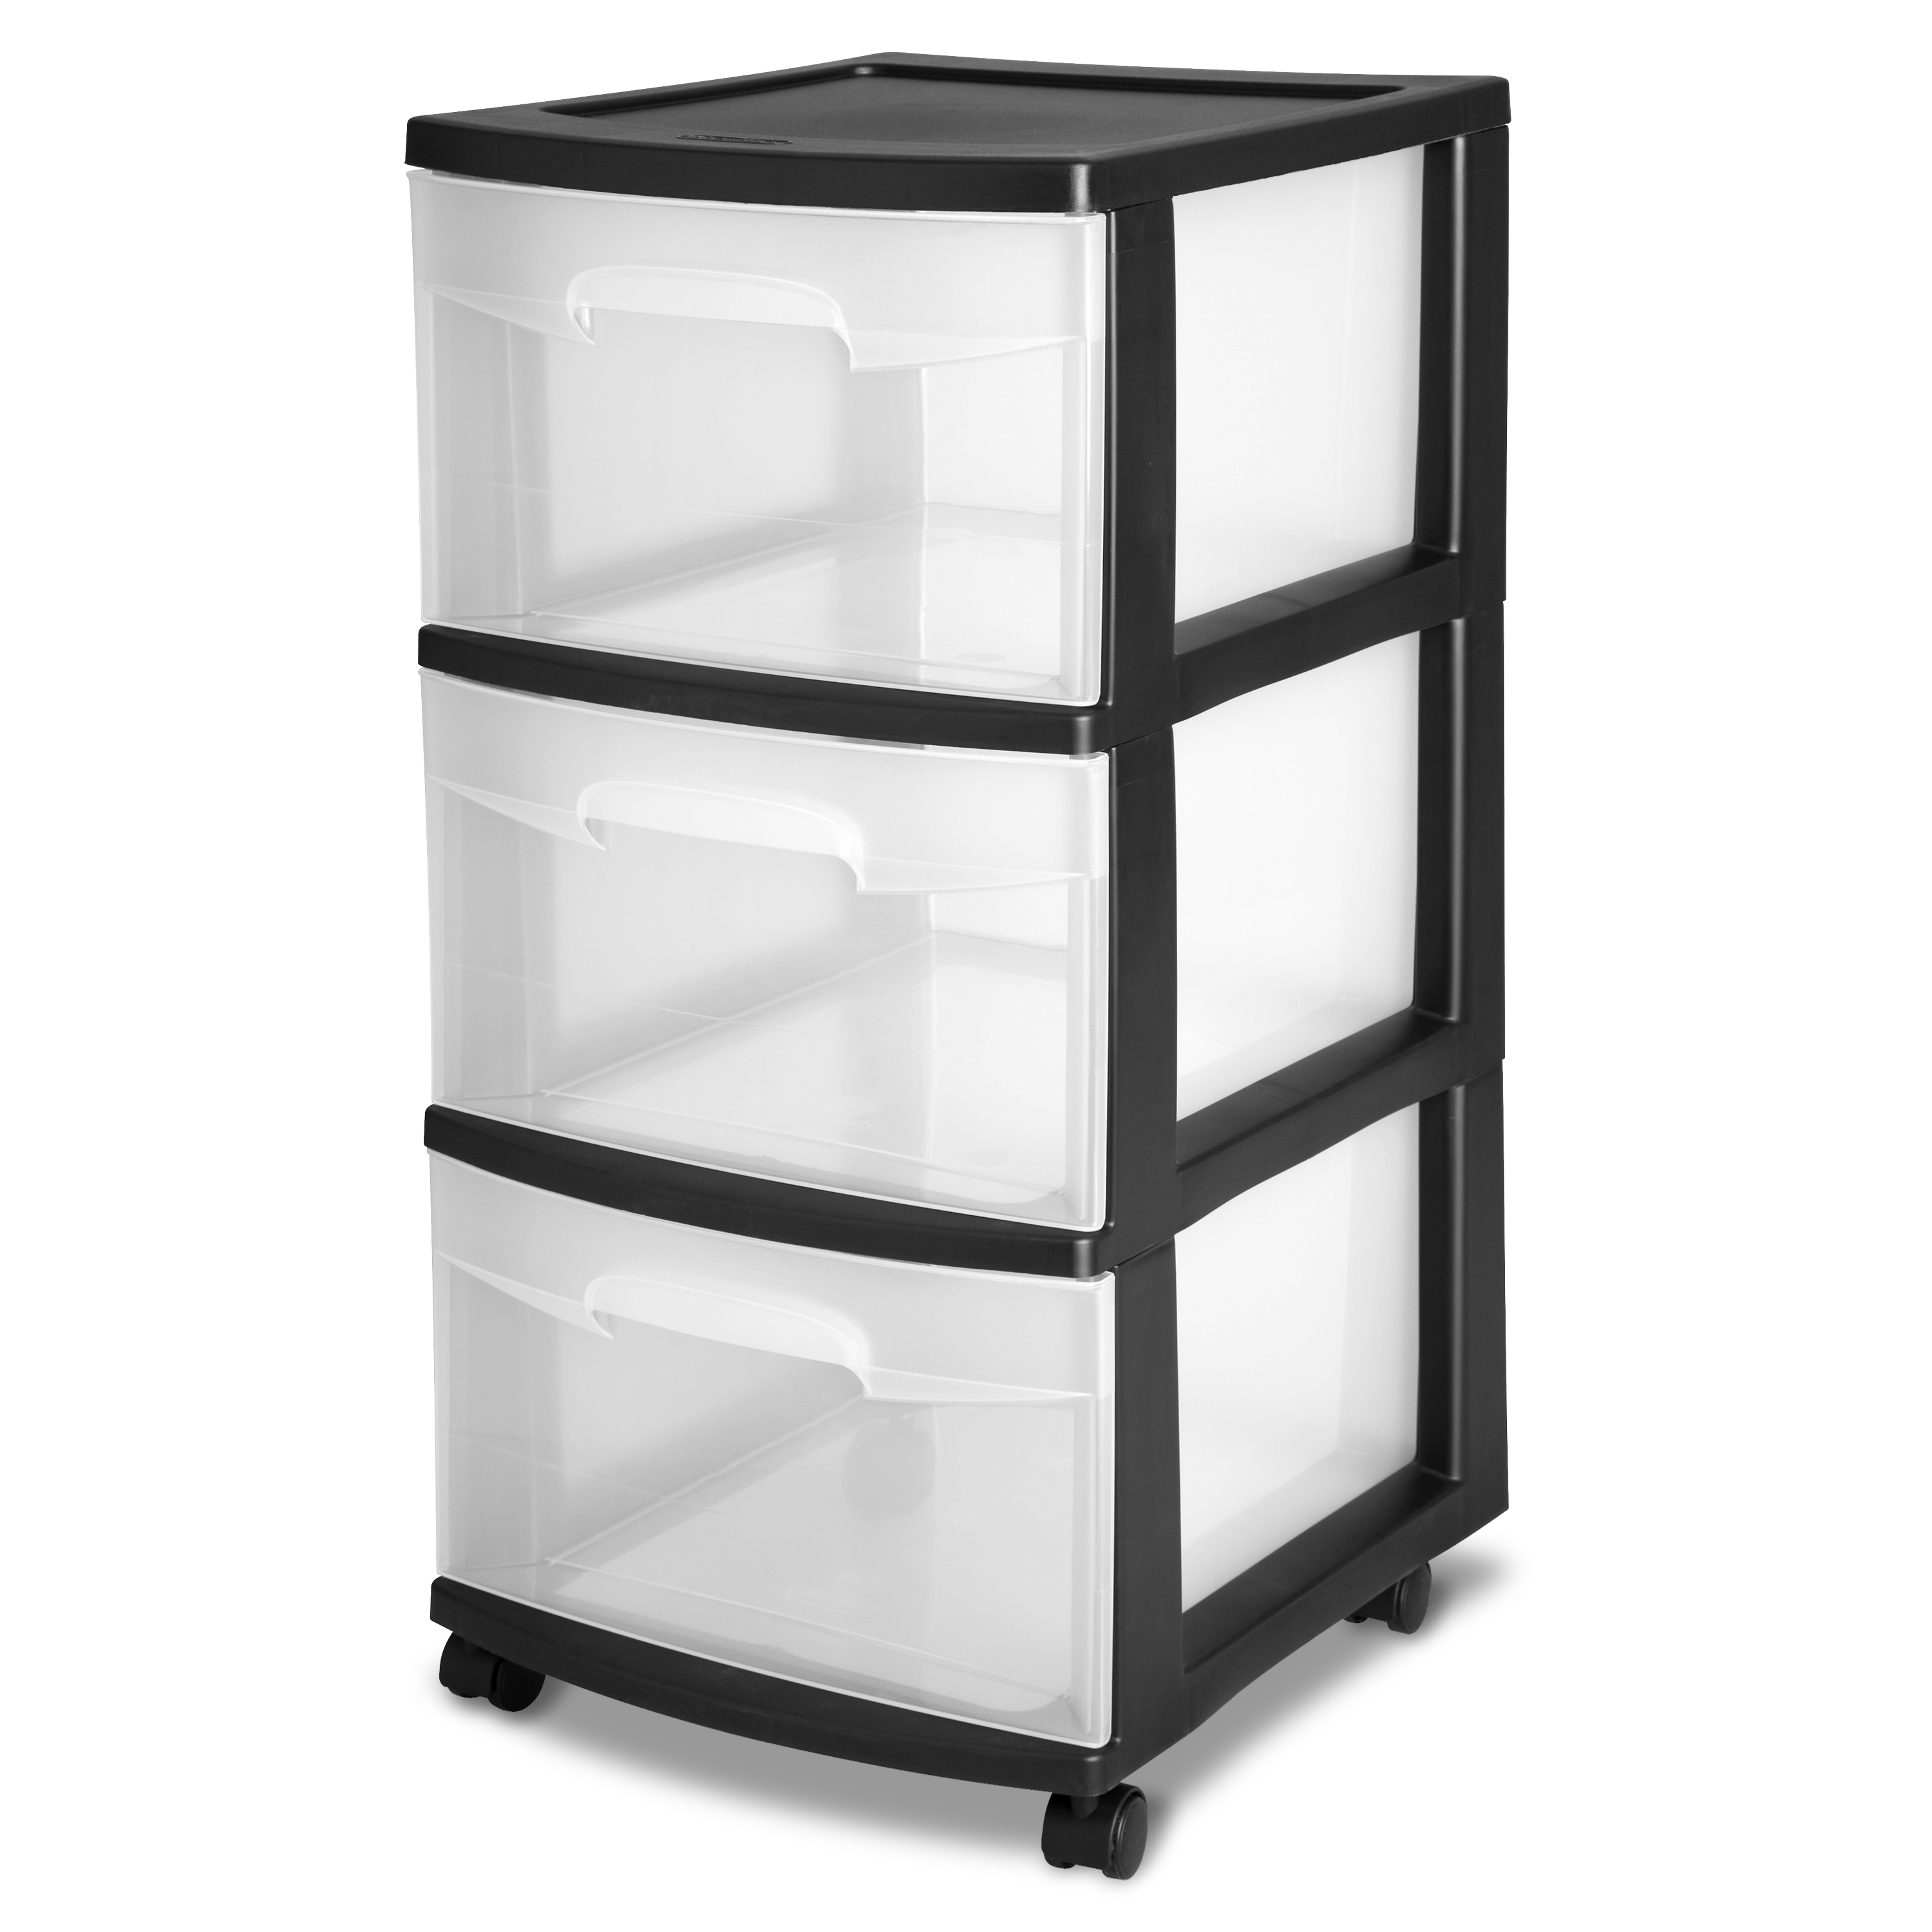 Sterilite 3 Drawer Plastic Cart, Black with Clear Drawers, Adult - image 1 of 8